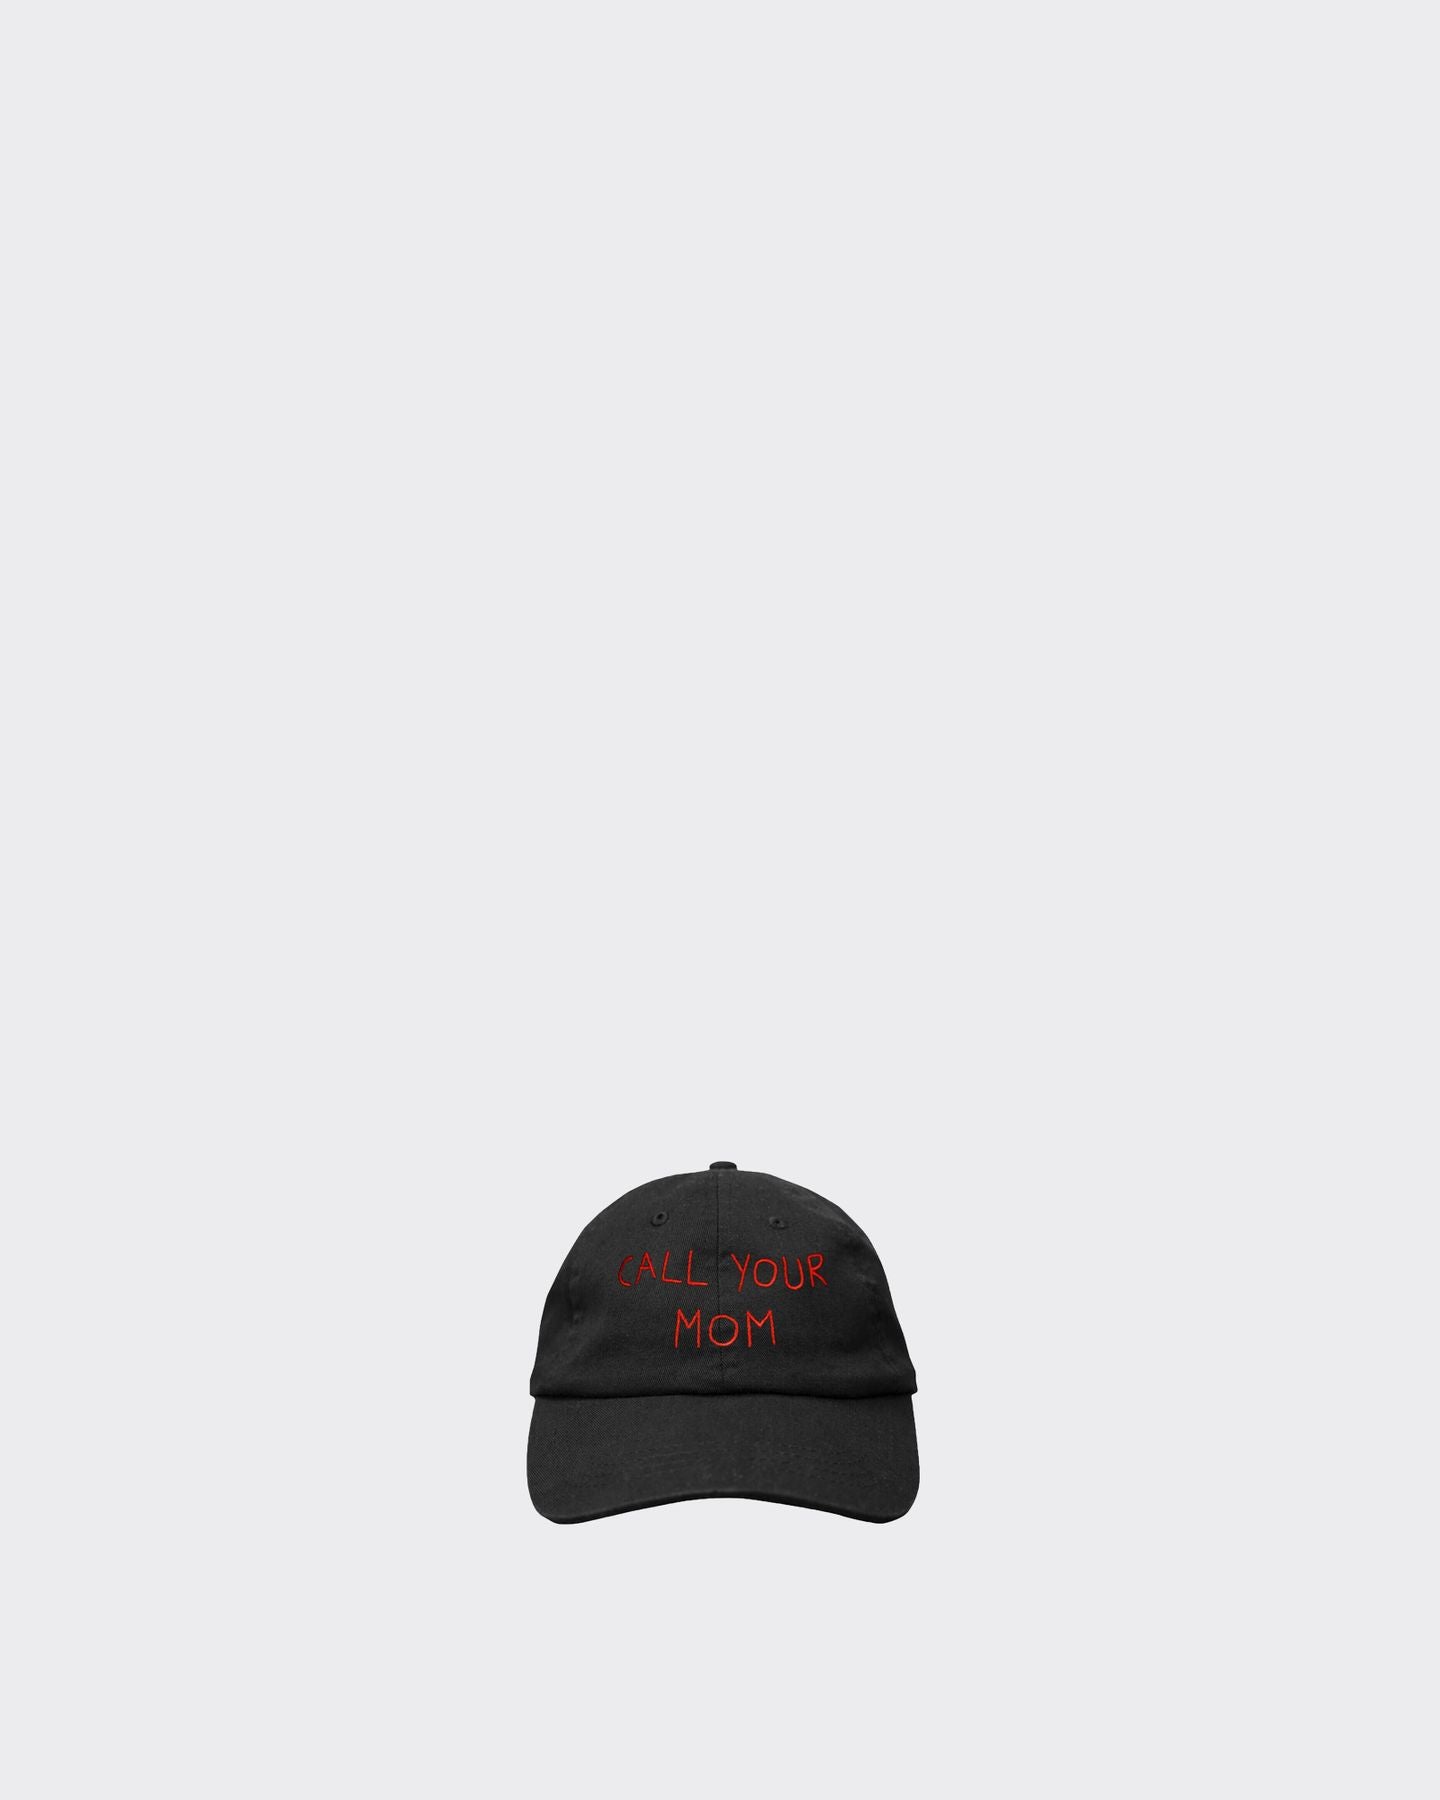 Call Your Mom Hat Black